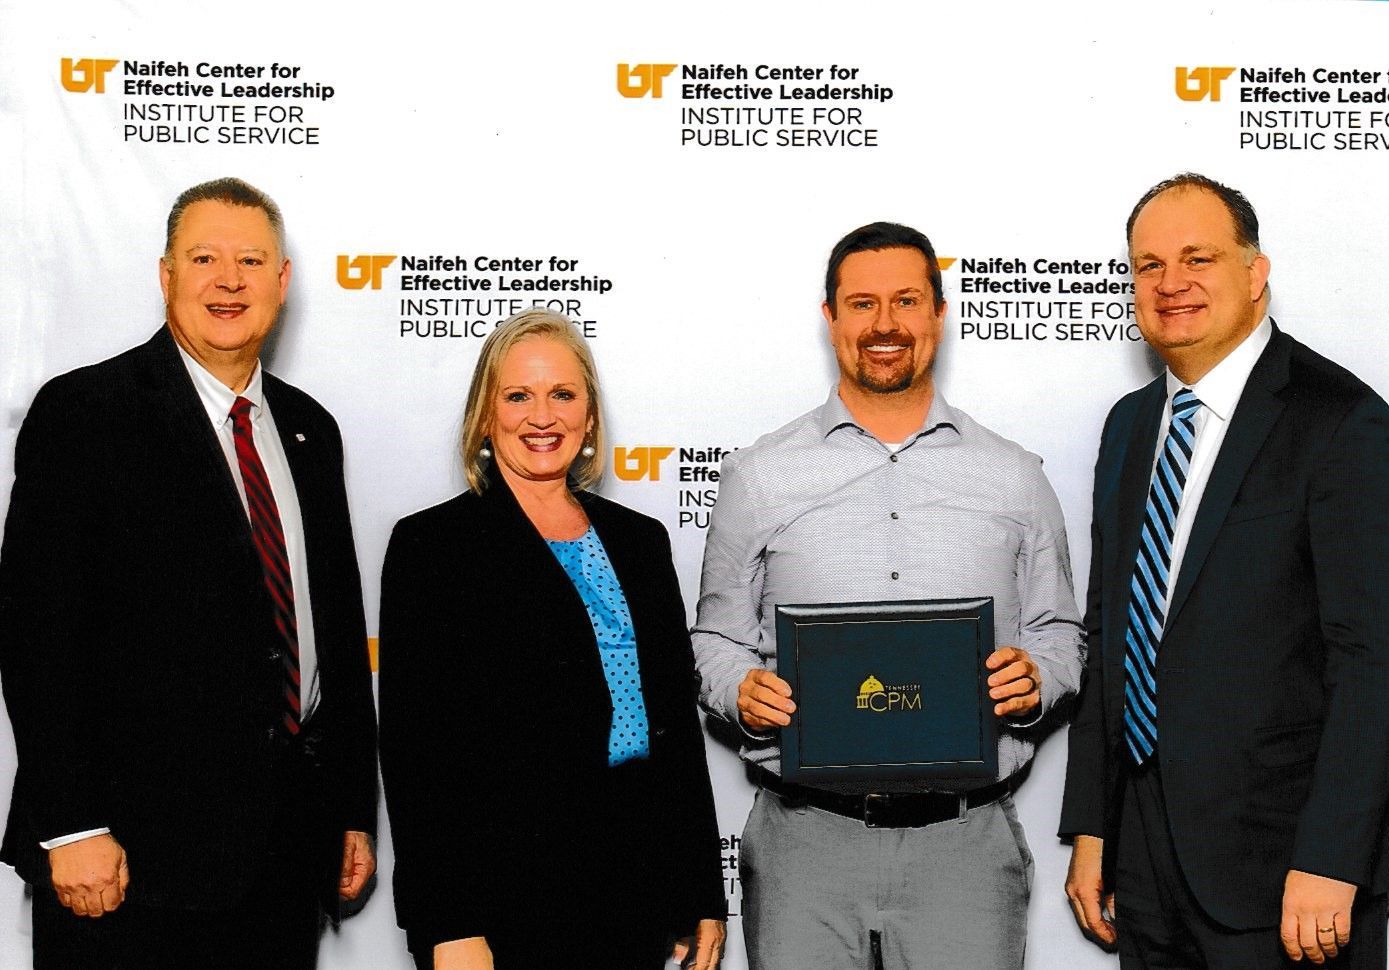 Planning and Zoning Director Jason Pilkinton receiving his Certified Public Manager certificate